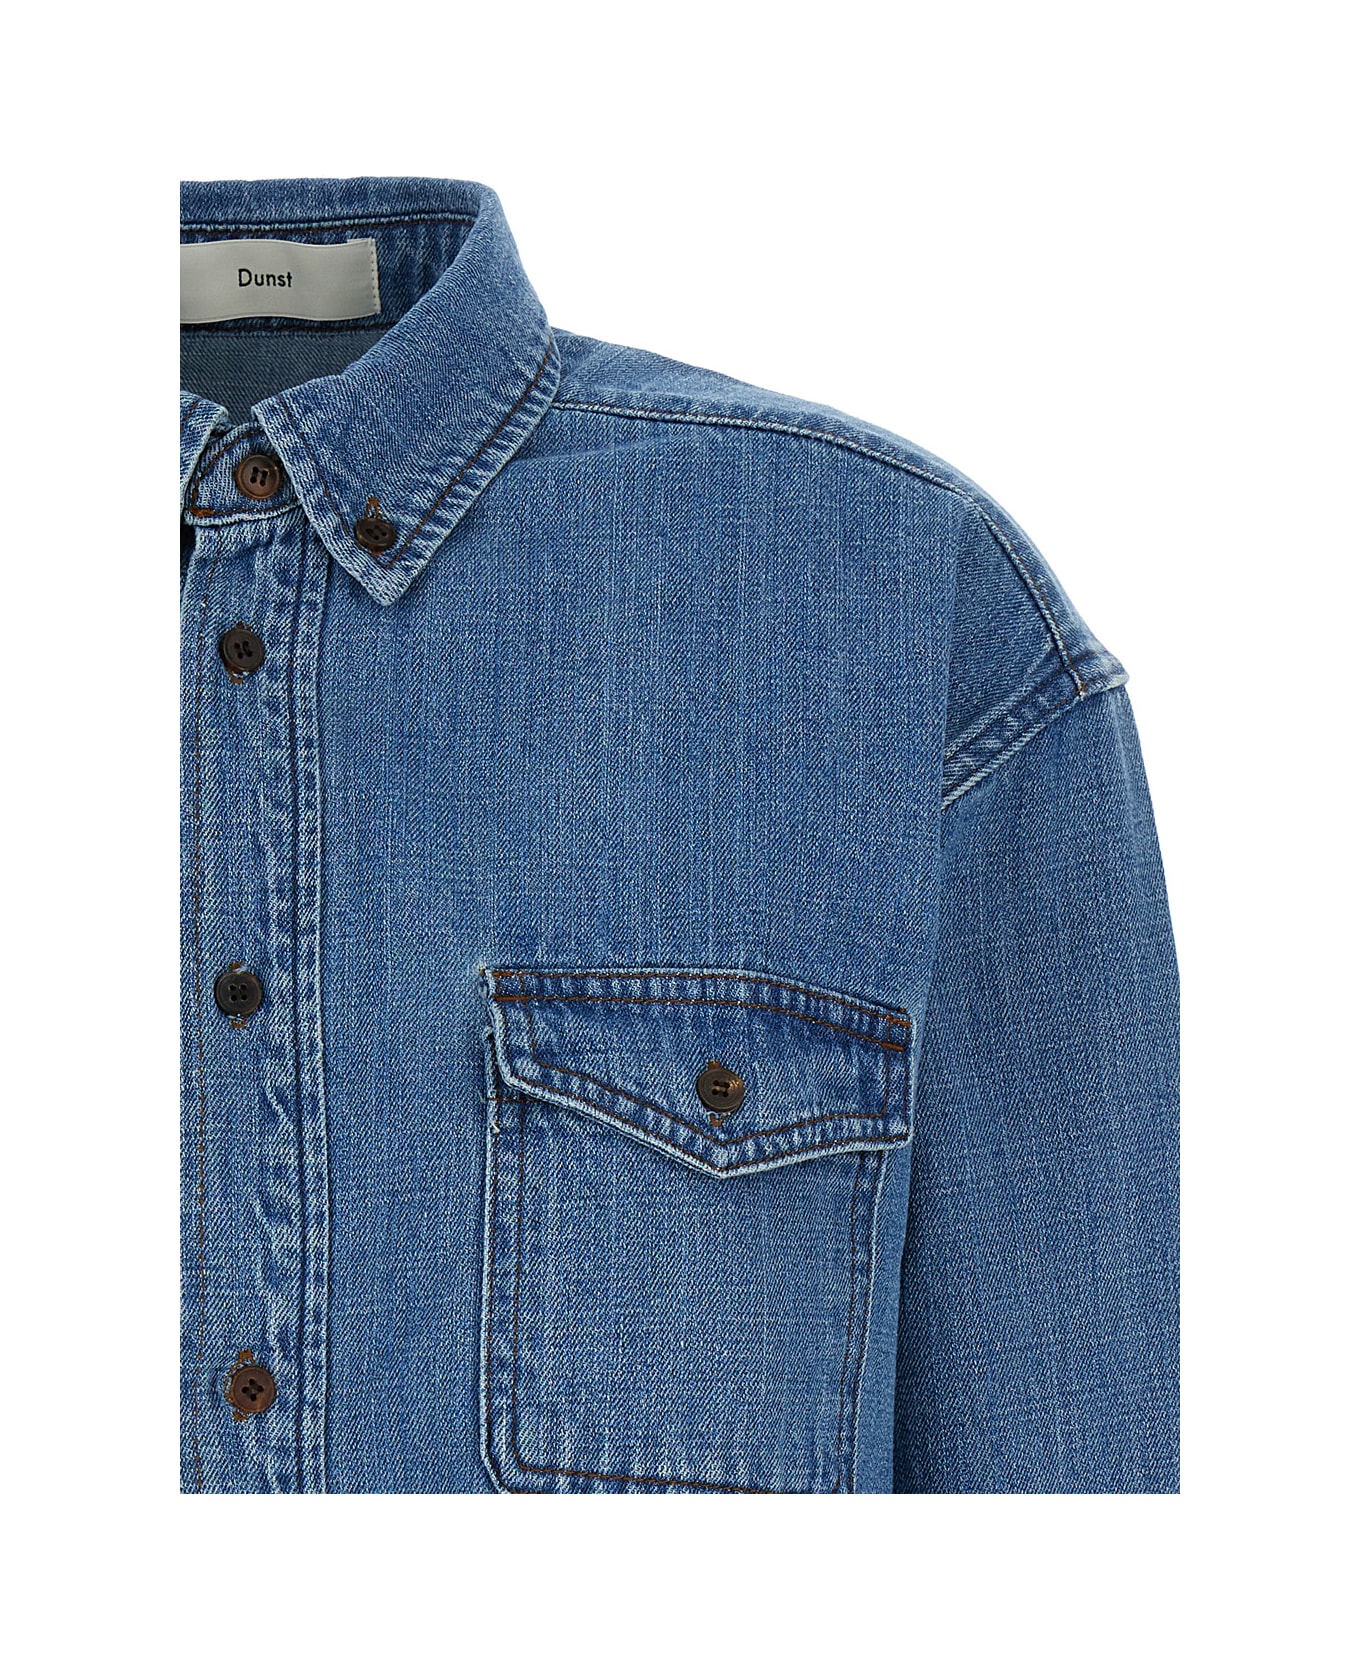 Dunst Blue Denim Shirt With Contrasting Stritching In Cotton Woman - Blu シャツ